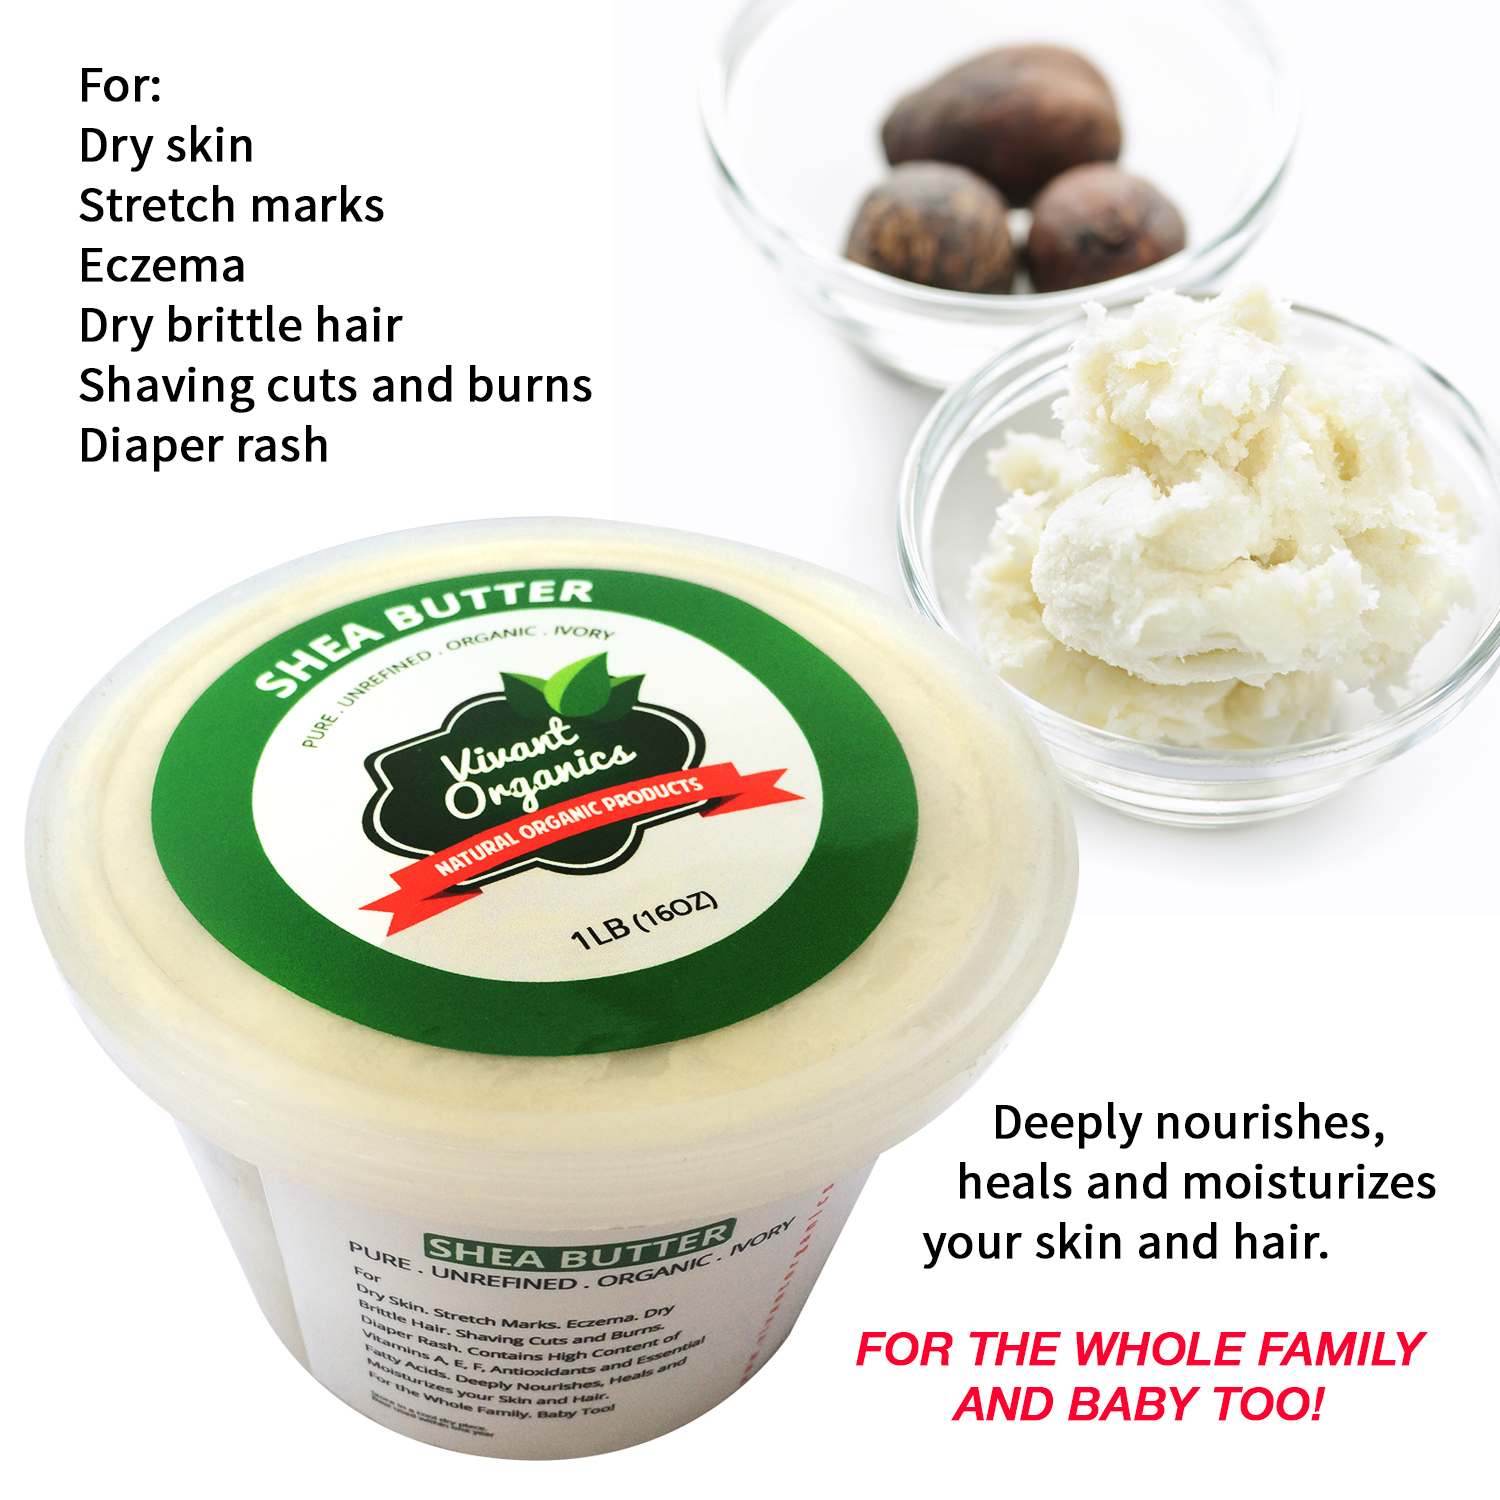 Pure Organic Ivory Shea butter from Vivant Organics, featured @homelifeabroad.com